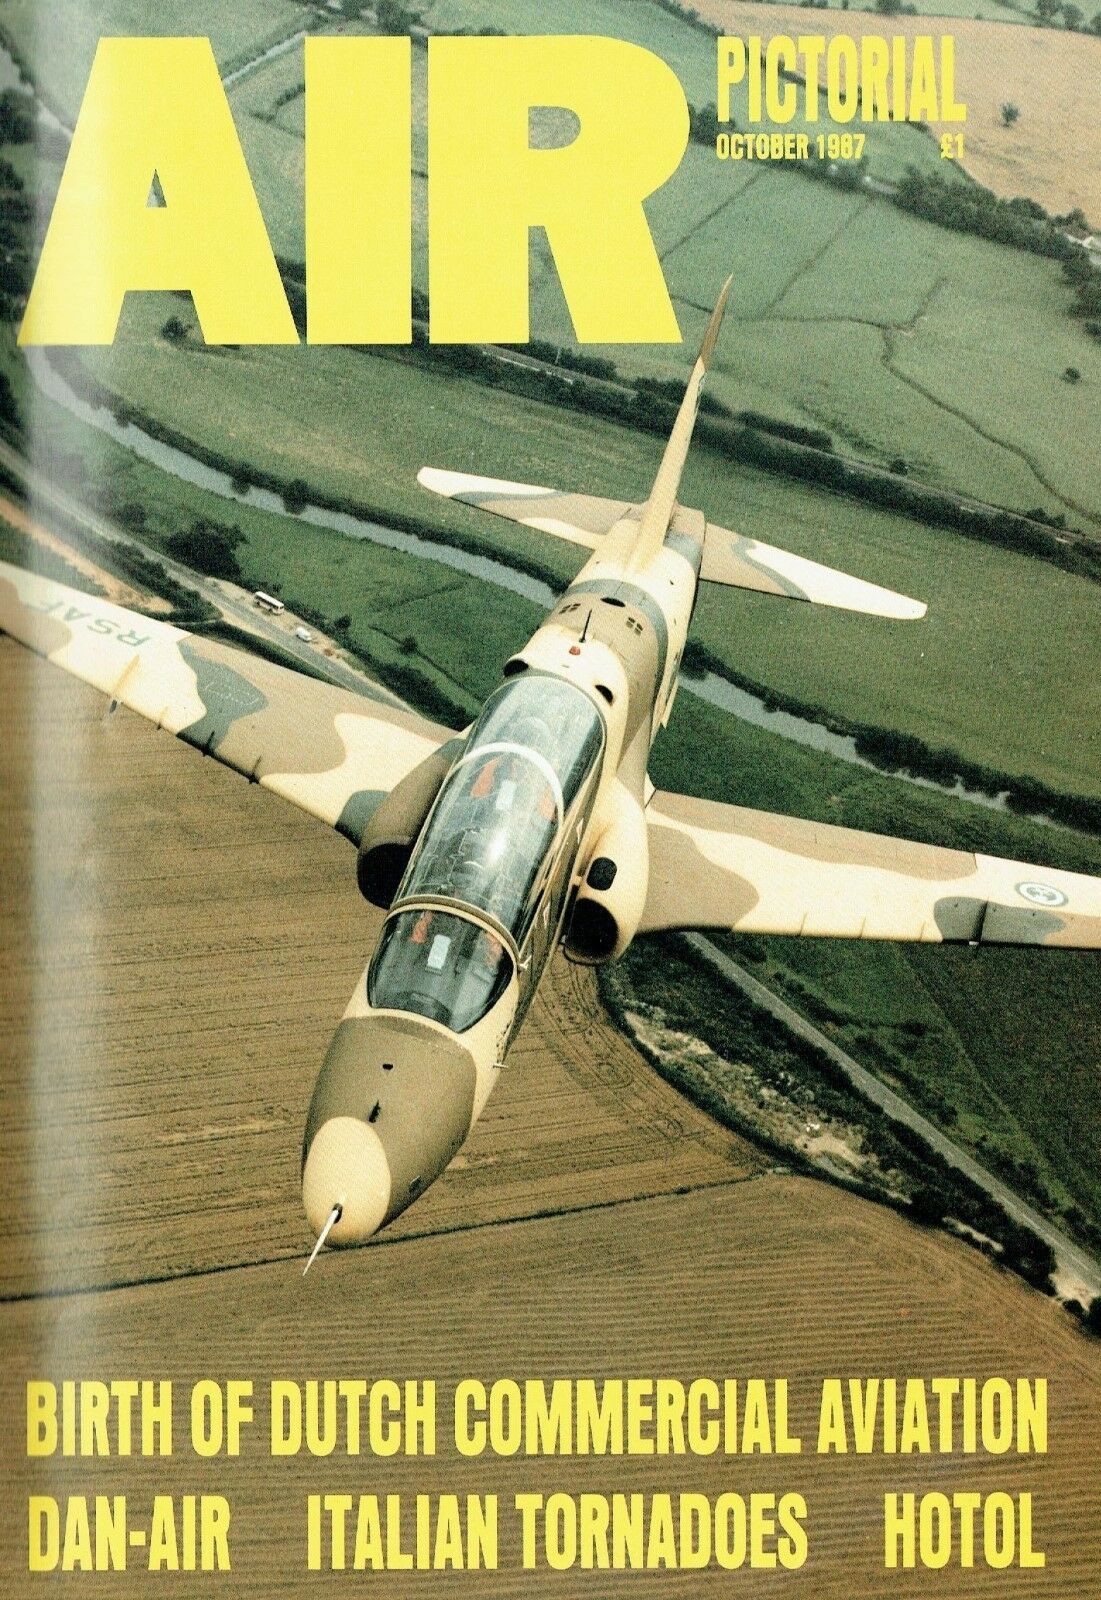 SPACE AGE REPORT/ FOKKER G.1/ He162 PLAN/ FE/ DOWNLOAD AIR PICTORIAL MAY 58 